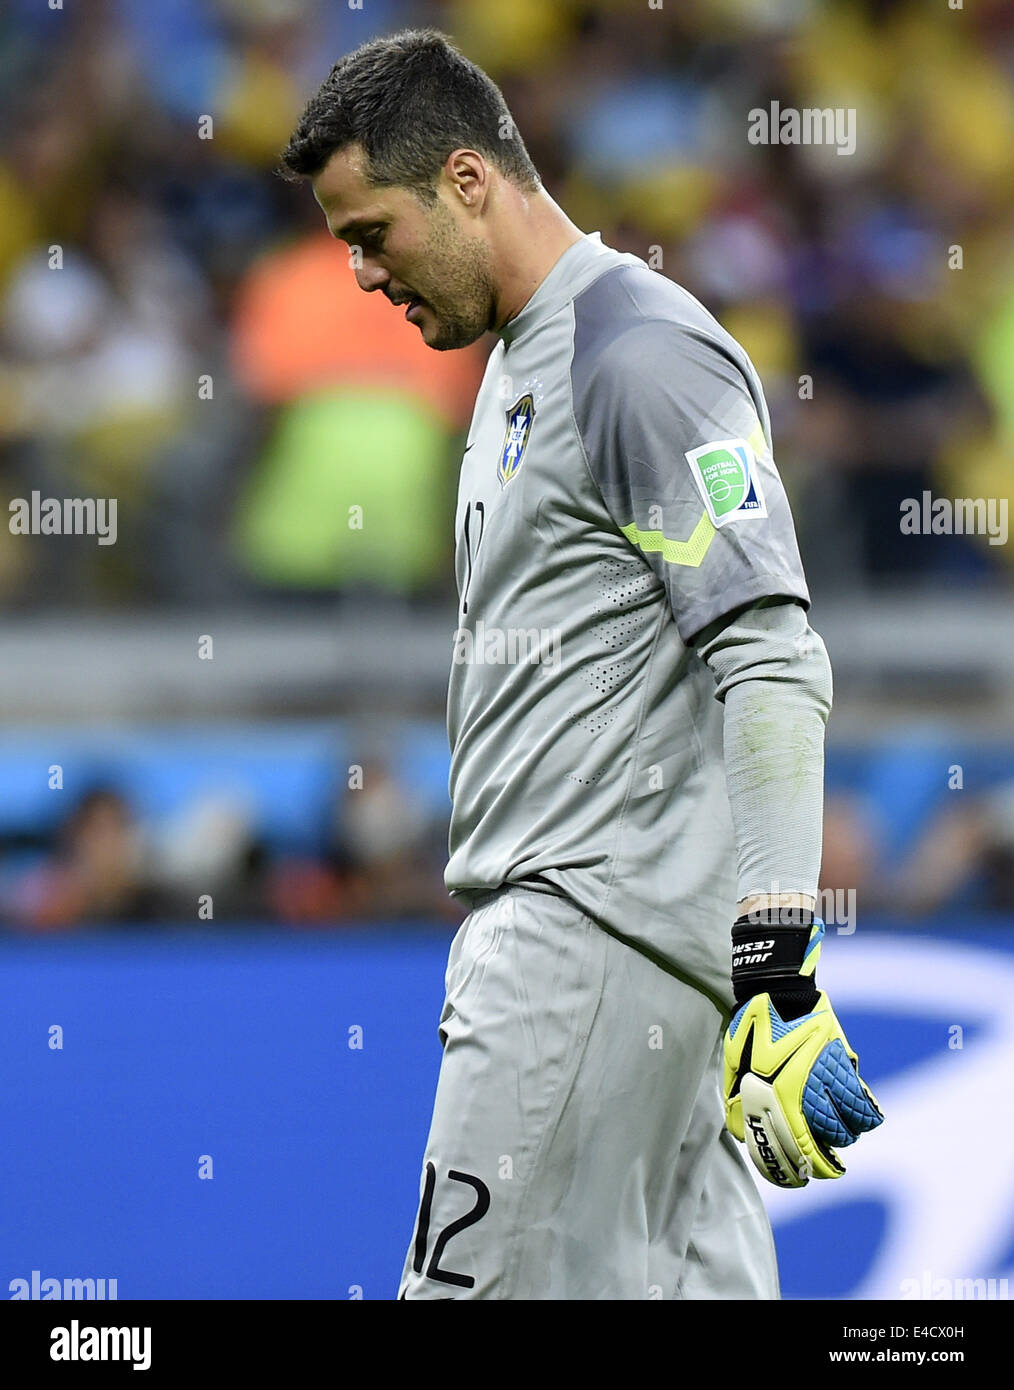 Belo Horizonte, Brazil. 8th July, 2014. Brazil's goalkeeper Julio Cesar reacts during a semifinal match between Brazil and Germany of 2014 FIFA World Cup at the Estadio Mineirao Stadium in Belo Horizonte, Brazil, on July 8, 2014. Germany won 7-1 over Brazil and qualified for the final on Tuesday. Credit:  Qi Heng/Xinhua/Alamy Live News Stock Photo